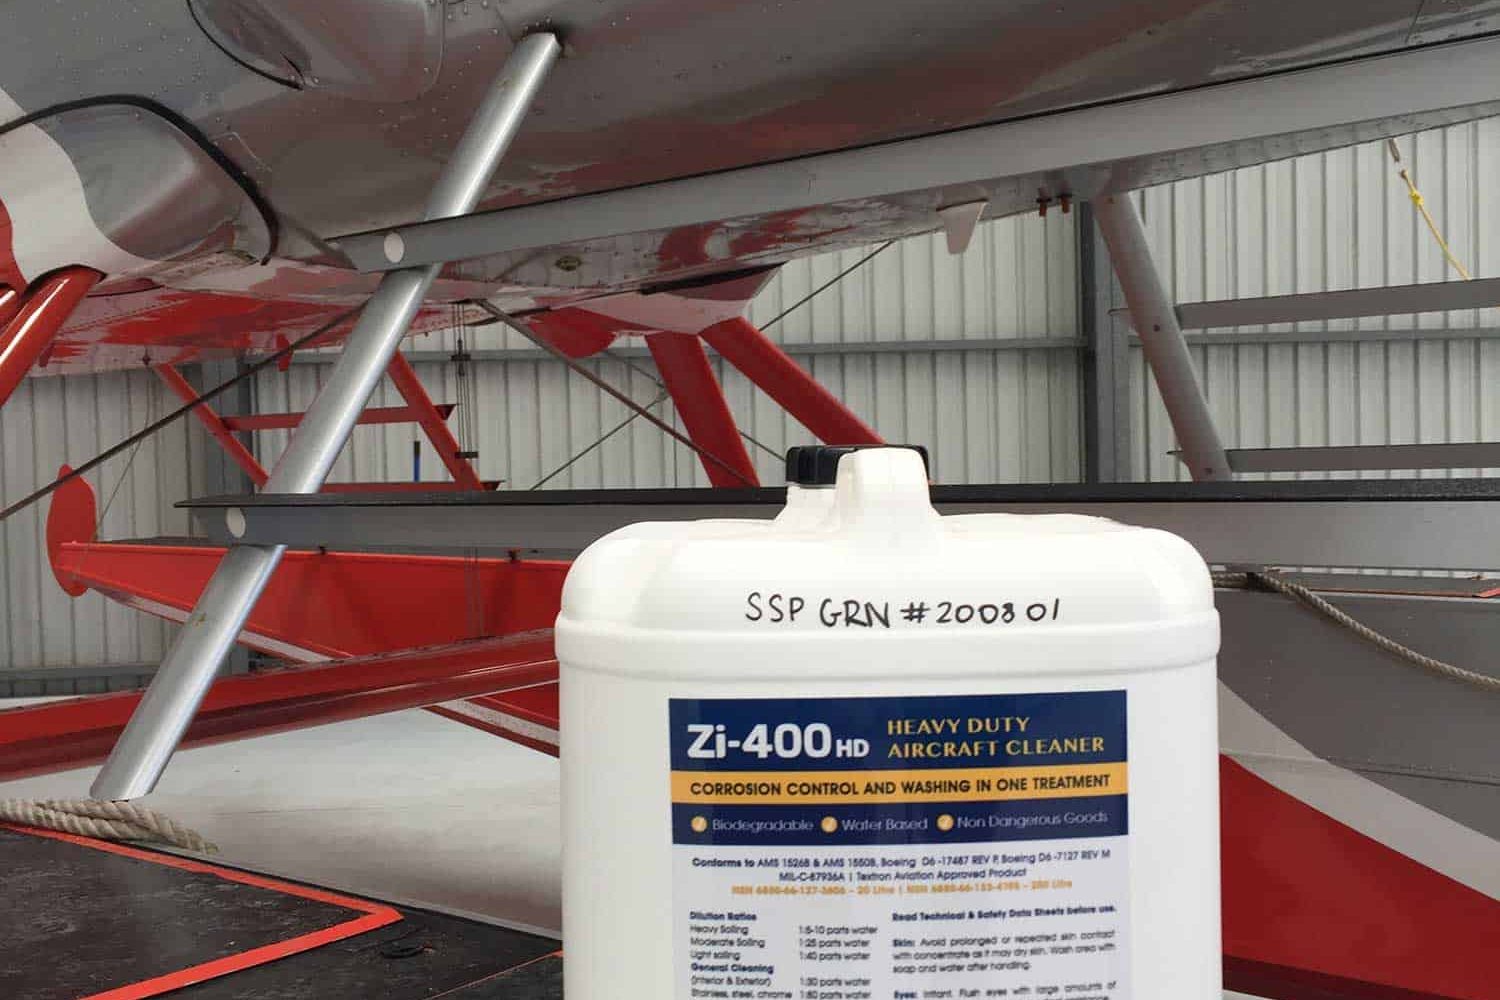 Sydney Seaplanes Zi-400 HD Aircraft Cleaner